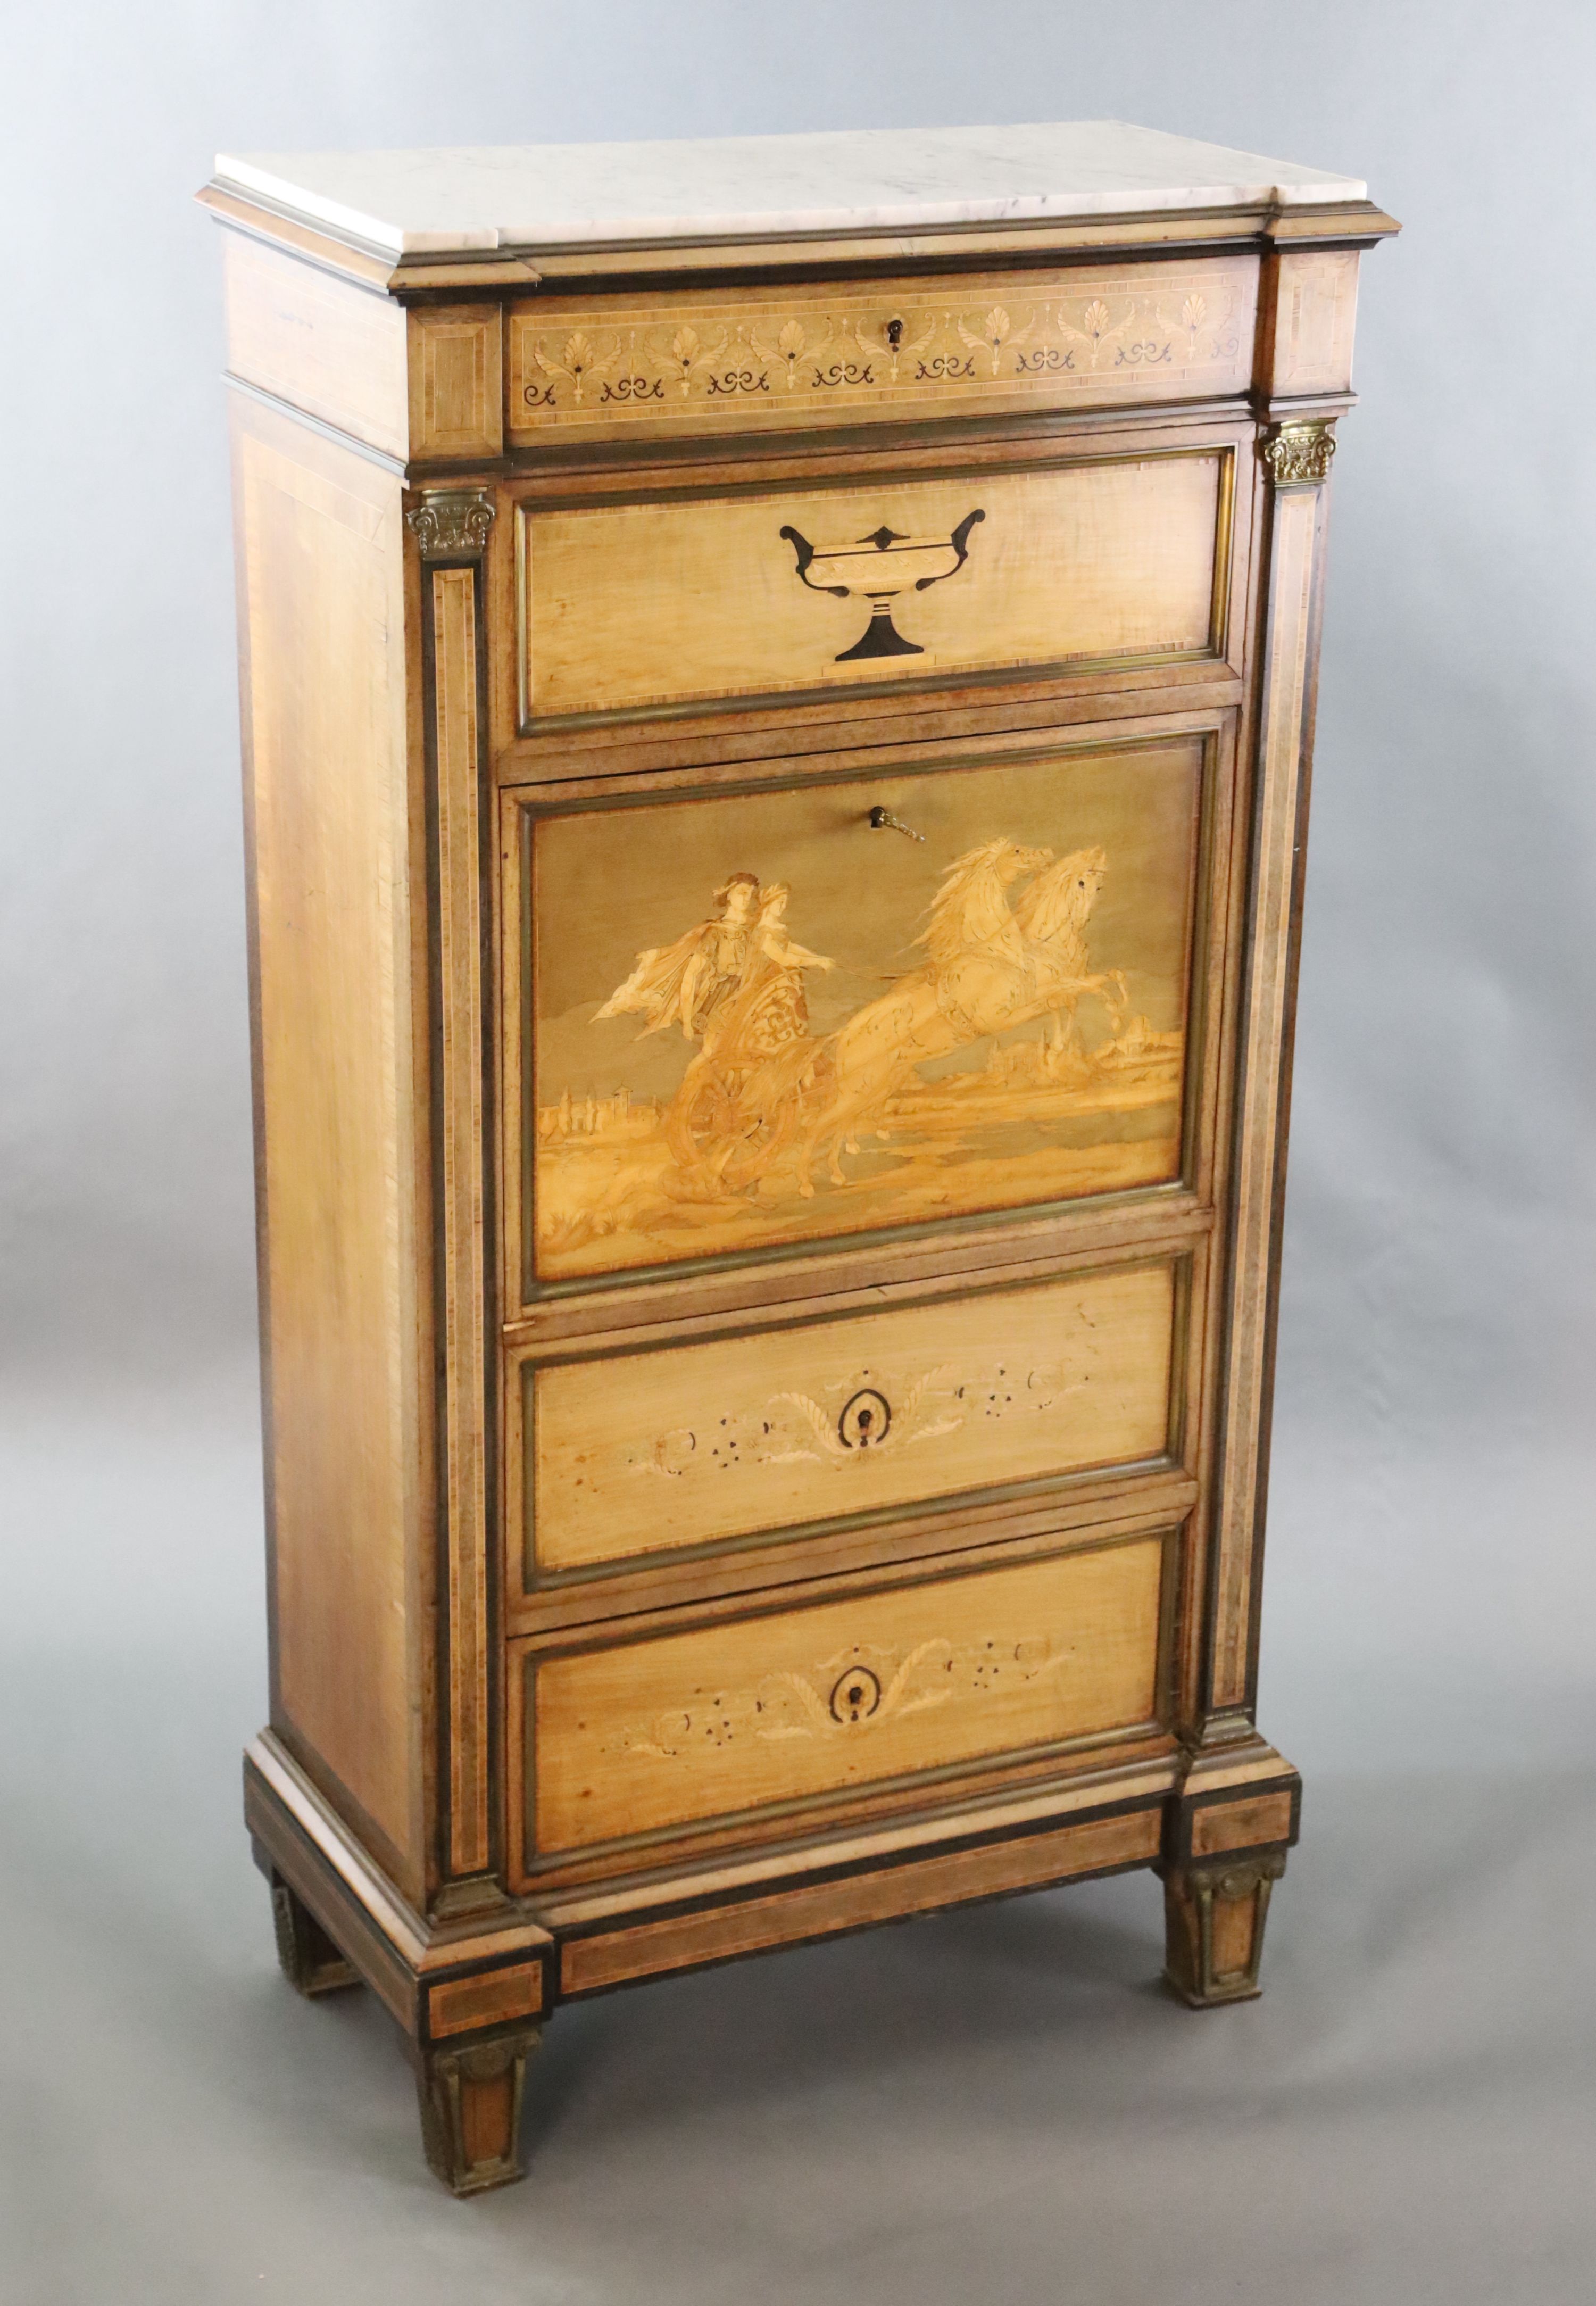 A 19th century French Louis XVI style ormolu mounted parquetry, mahogany secretaire à abbatant, W.2ft 7.5in. D.1ft 4in. H.5ft